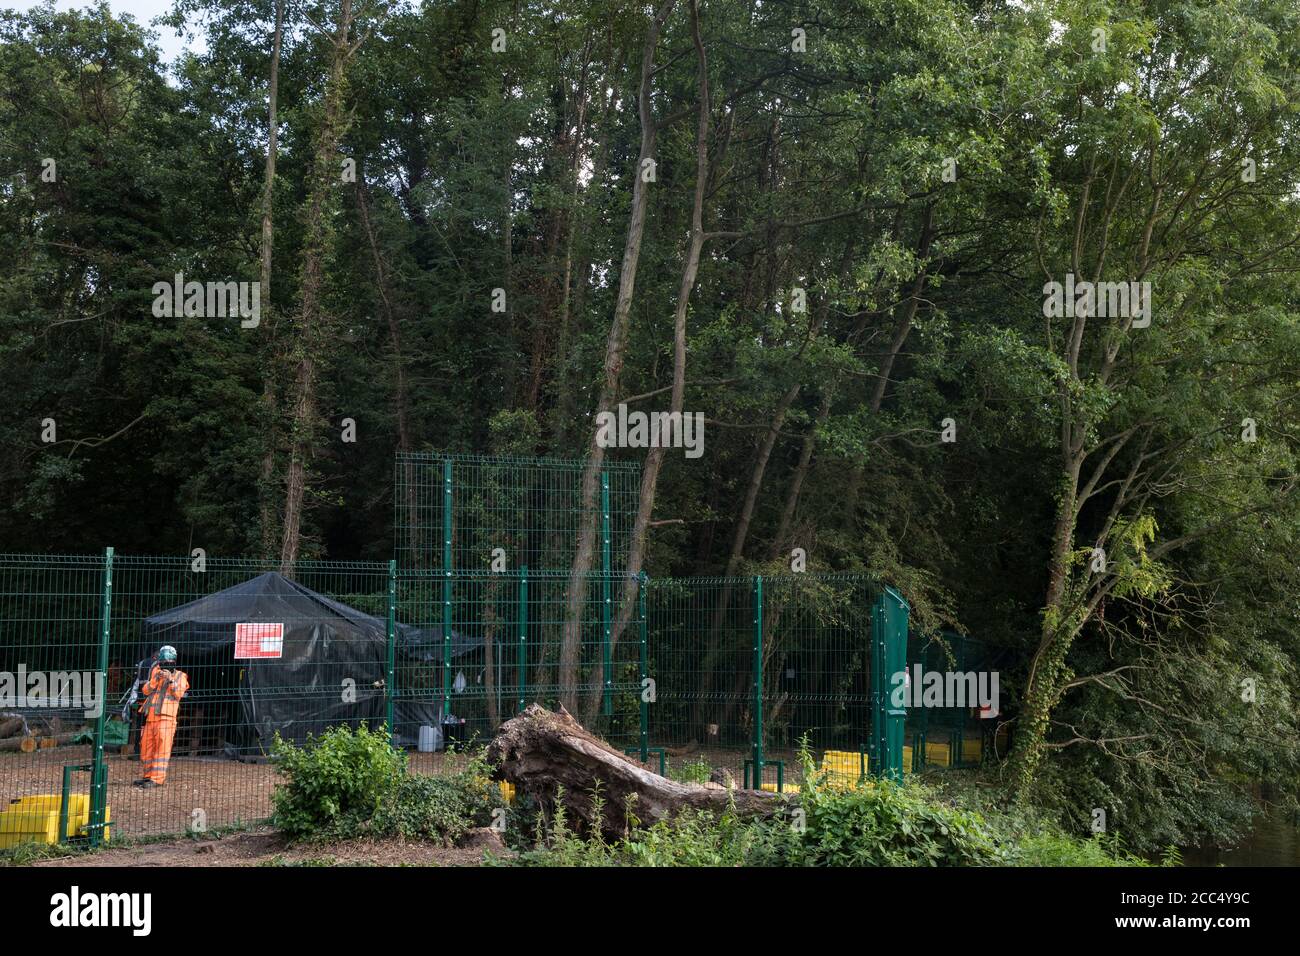 Denham, UK. 11th August, 2020. Fencing is pictured just after being moved forward by HS2 workers from a compound in which they are removing trees and vegetation to close a footpath alongside the river Colne used by environmental activists from HS2 Rebellion to access the Denham Protection Camp. The activists are protesting against work in the Colne Valley connected to the HS2 high-speed rail link. Credit: Mark Kerrison/Alamy Live News Stock Photo